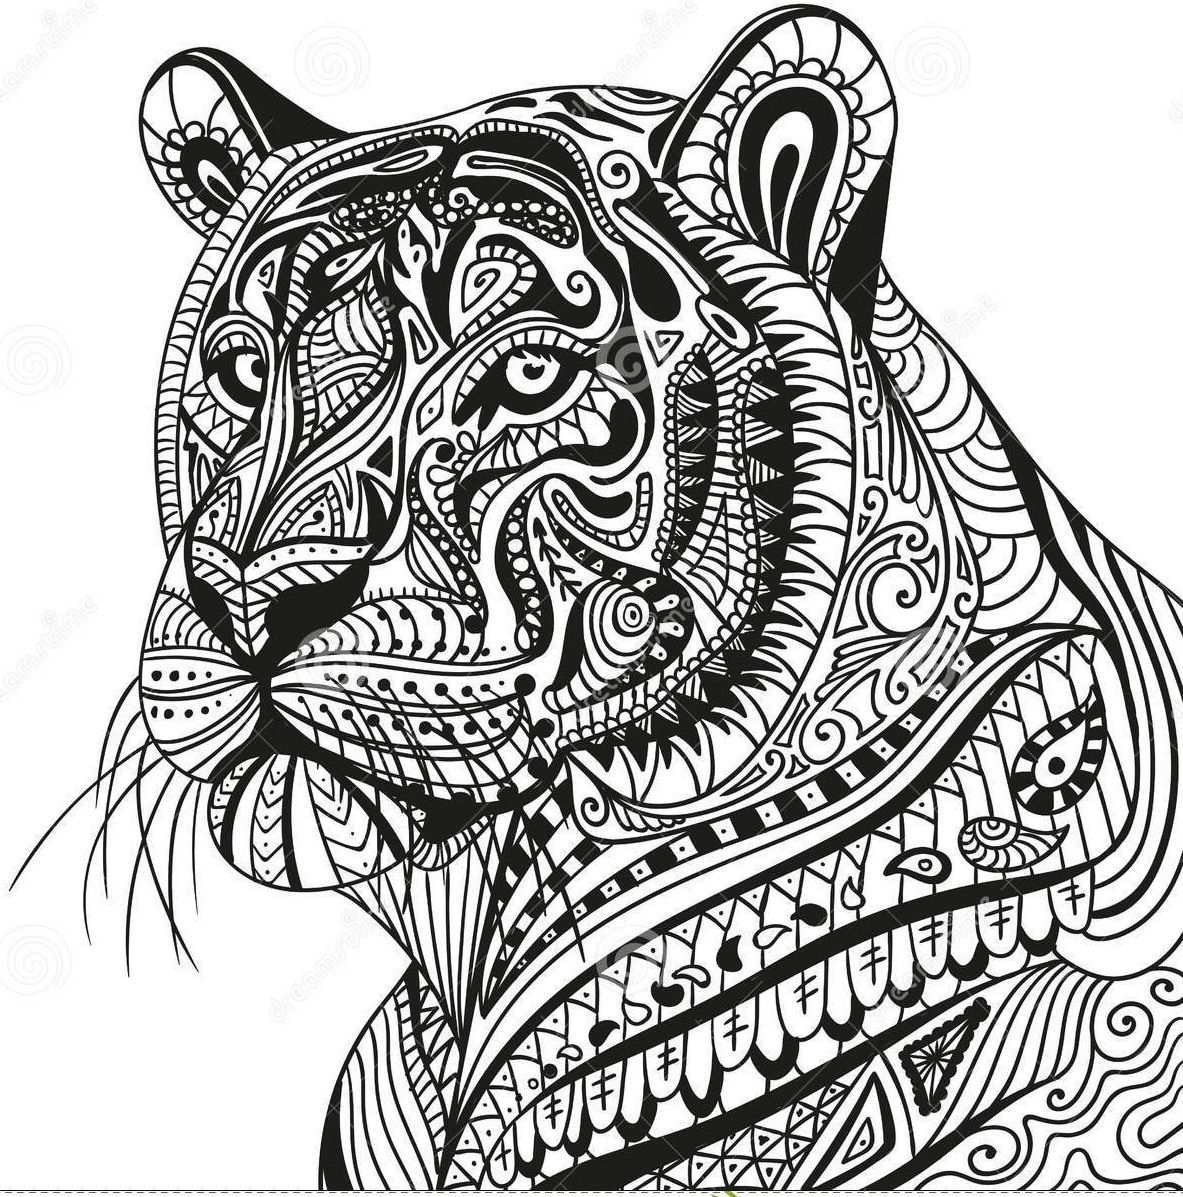 Pin By Marielle Vos On Katten Mandala Coloring Pages Animal Wall Decals Zentangle Ani